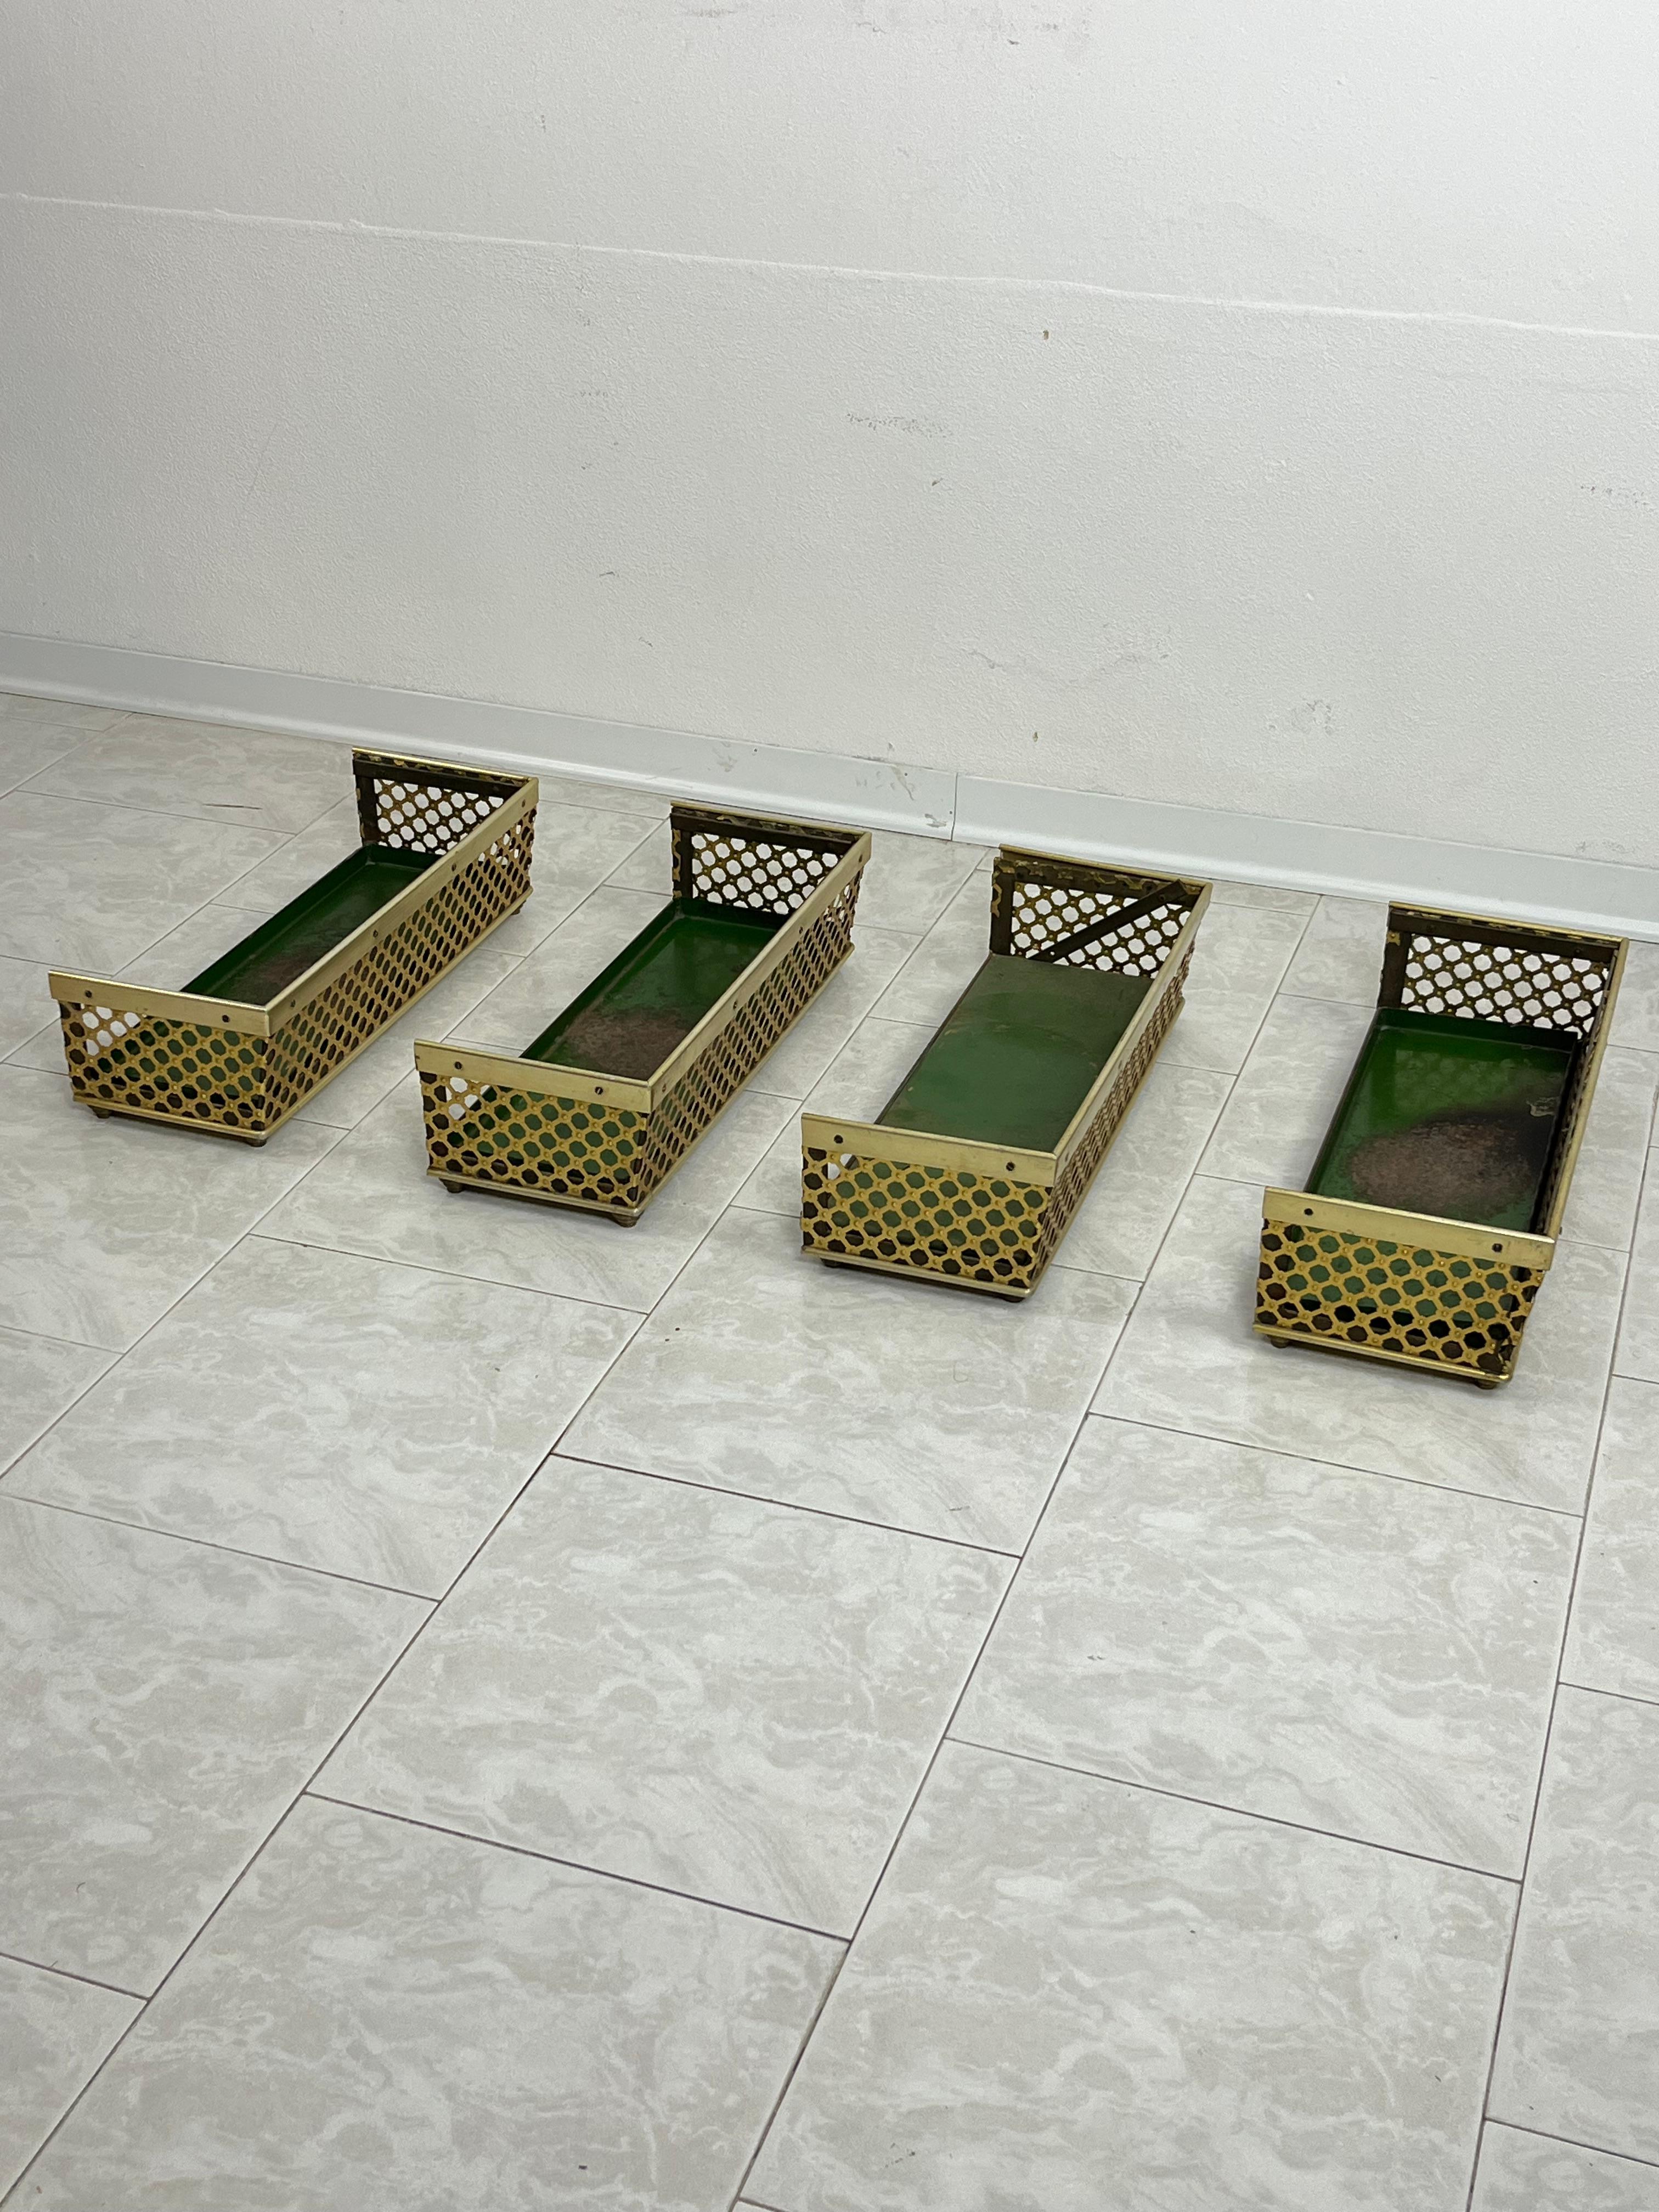 Mid-20th Century Set of 4 Mid-Century Brass-Covered Planters Attributed to Gio Ponti 1950s For Sale